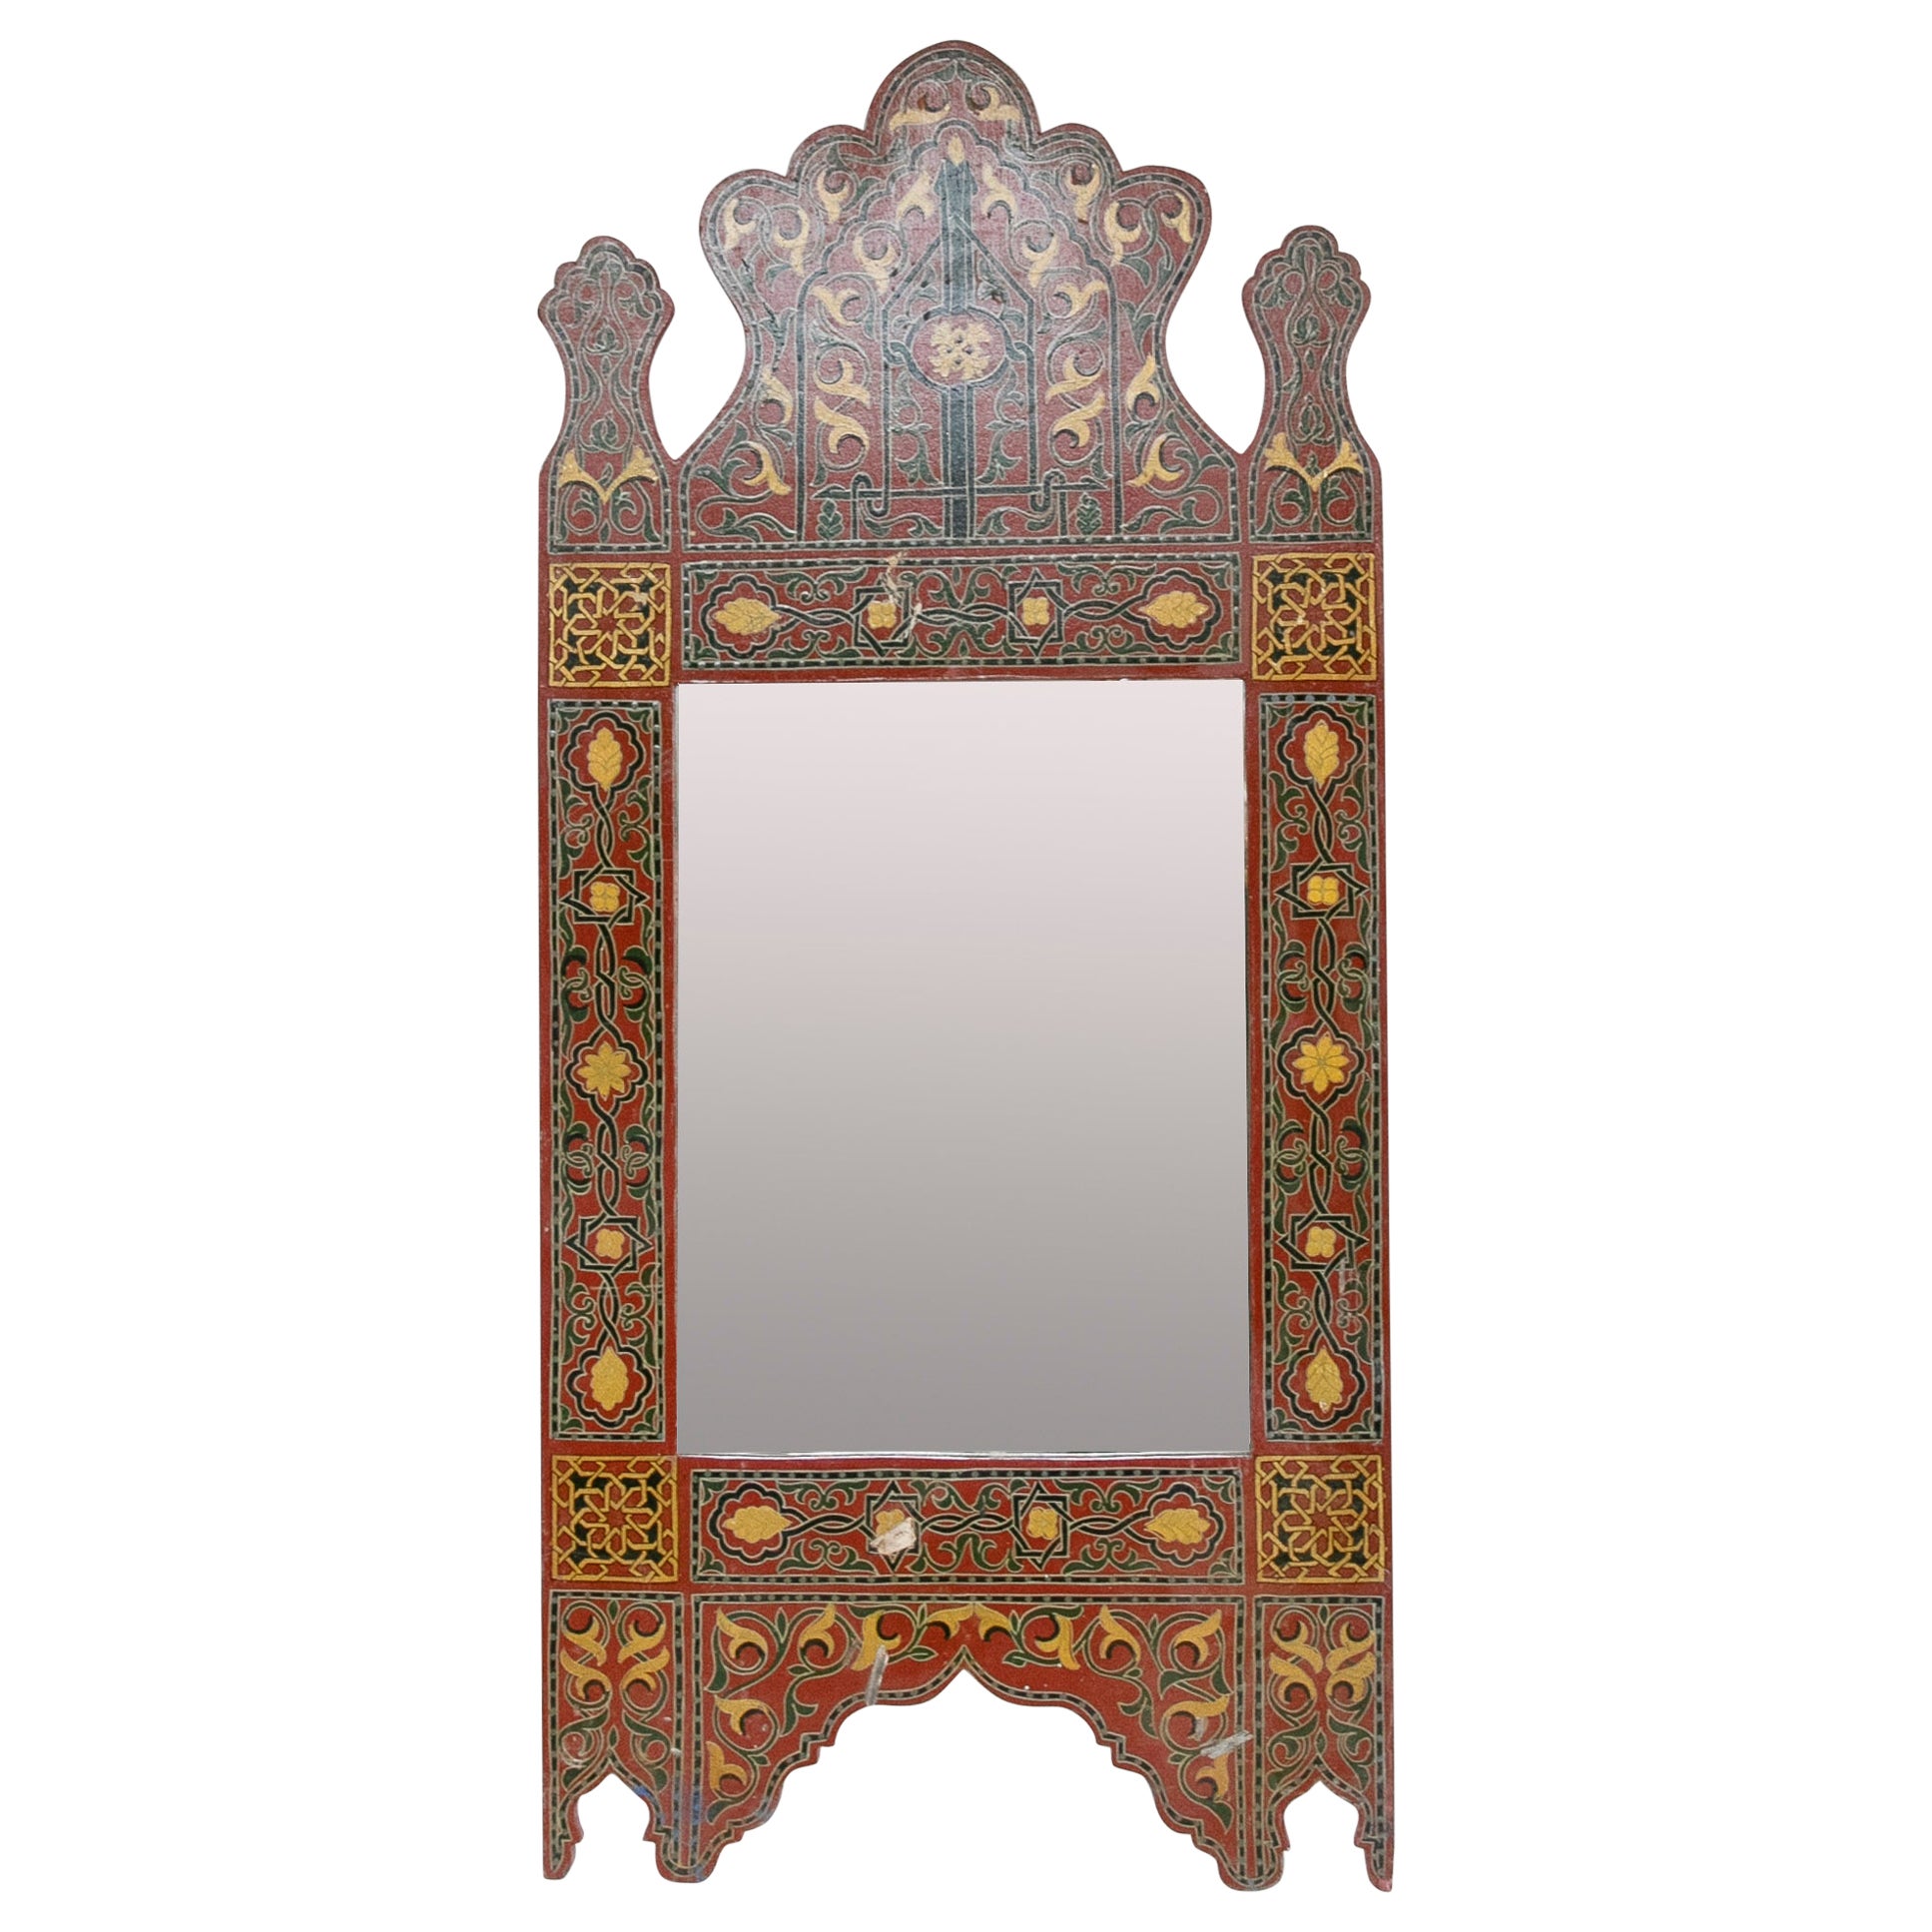 1990s Hand Painted Moroccan Style Wooden Mirror with Arabic Decorations